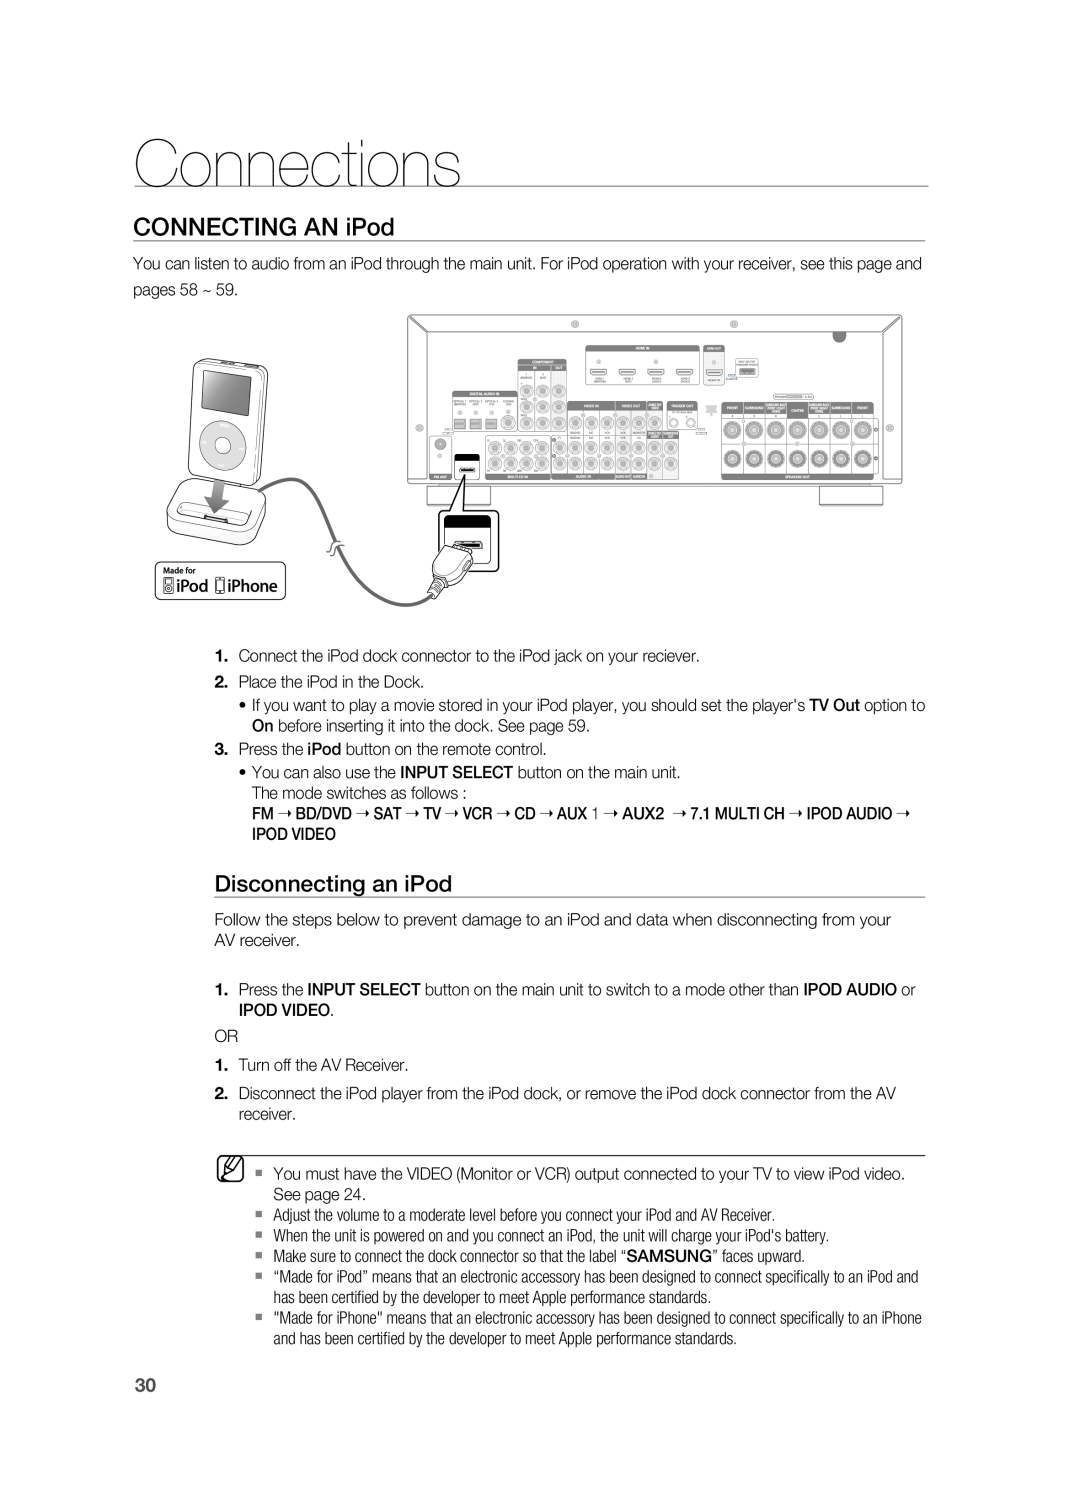 Samsung HW-C900-XAA user manual Connections, CONNECTING AN iPod, Disconnecting an iPod 